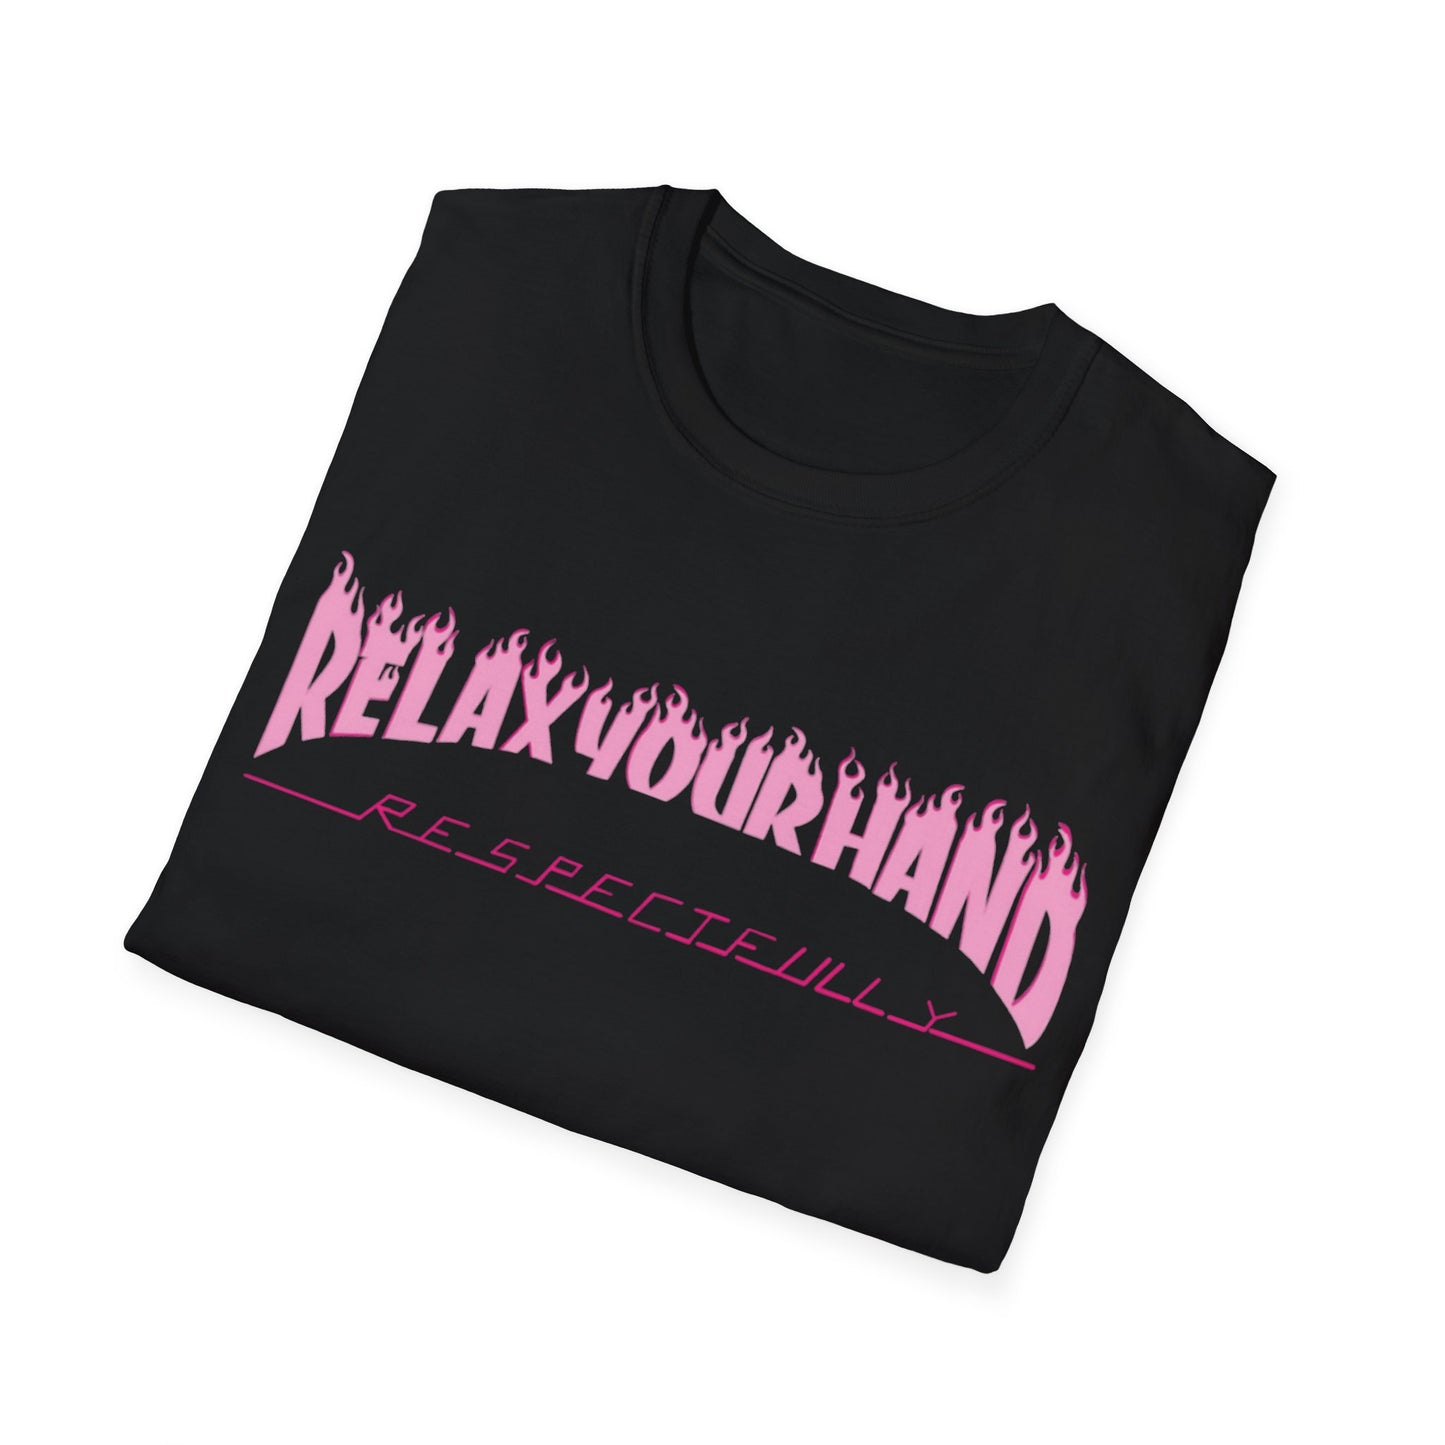 RELAX YOUR HAND merch